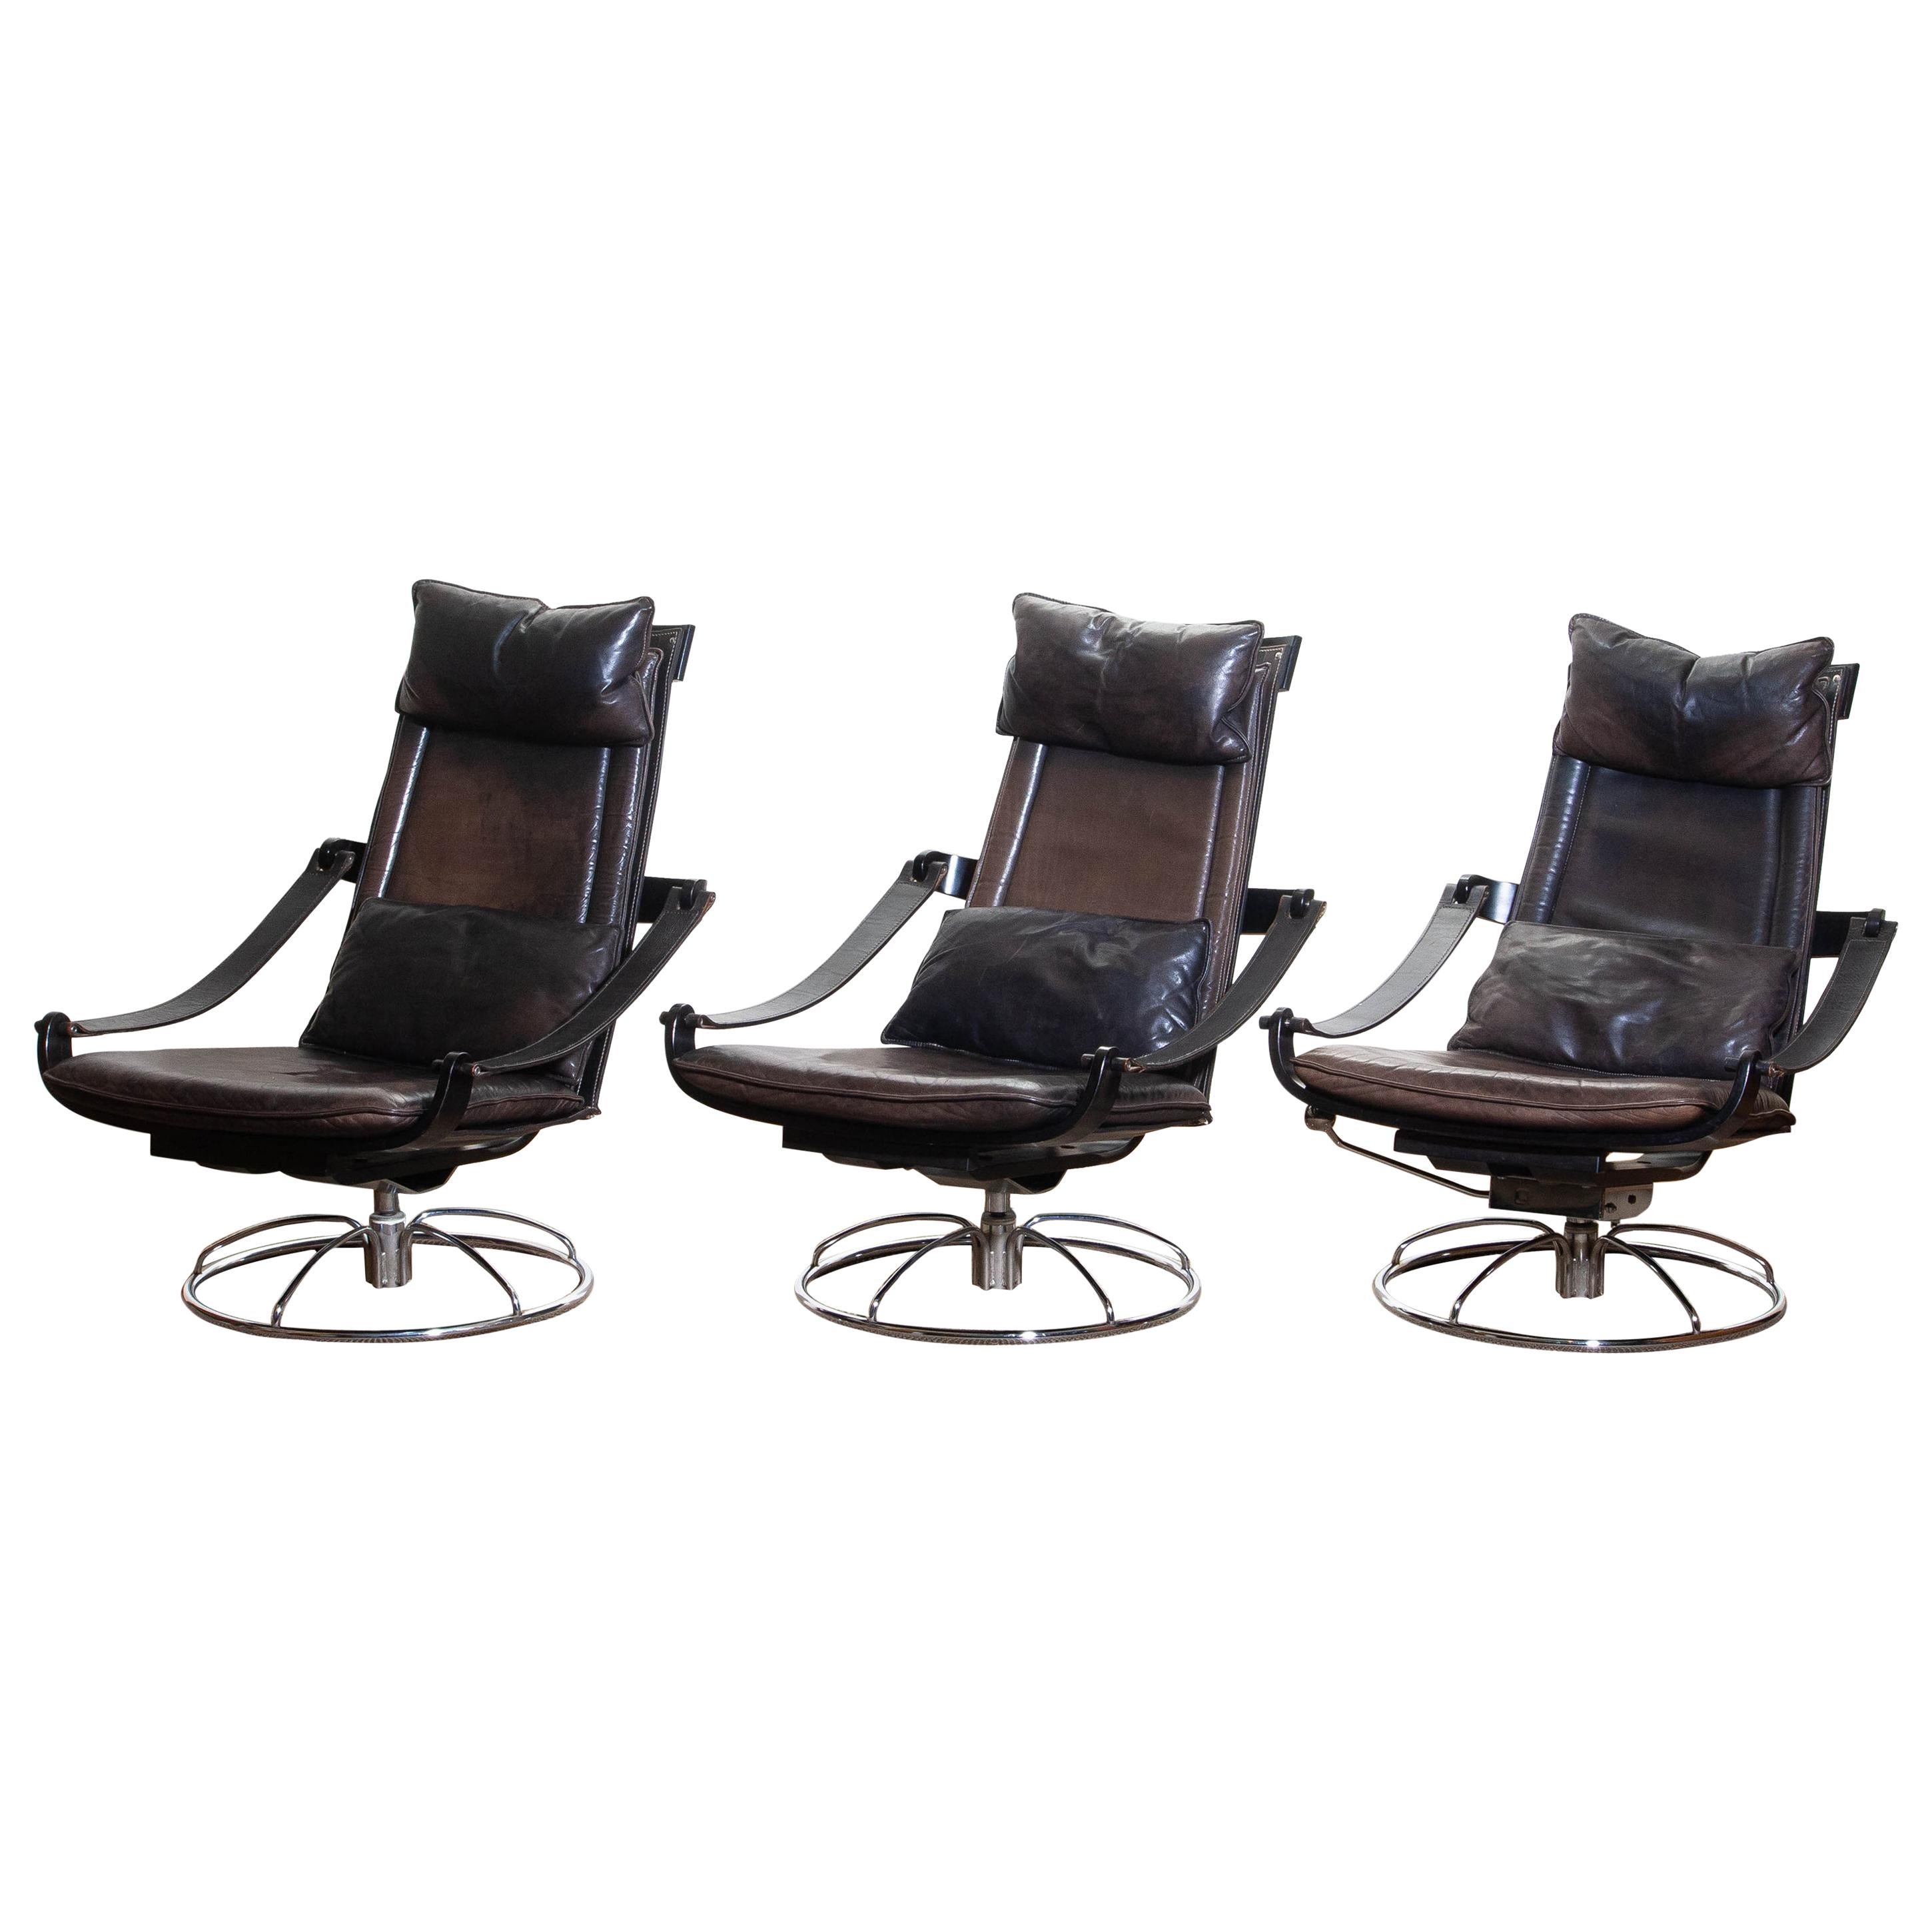 Extremely beautiful and artistic set of three swivel easy / lounge chairs designed by Åke Fribytter for Nelo, Sweden.
These high quality chairs features a plywood frame and brown leather cushions and a chromed metal base.
One chair has got an